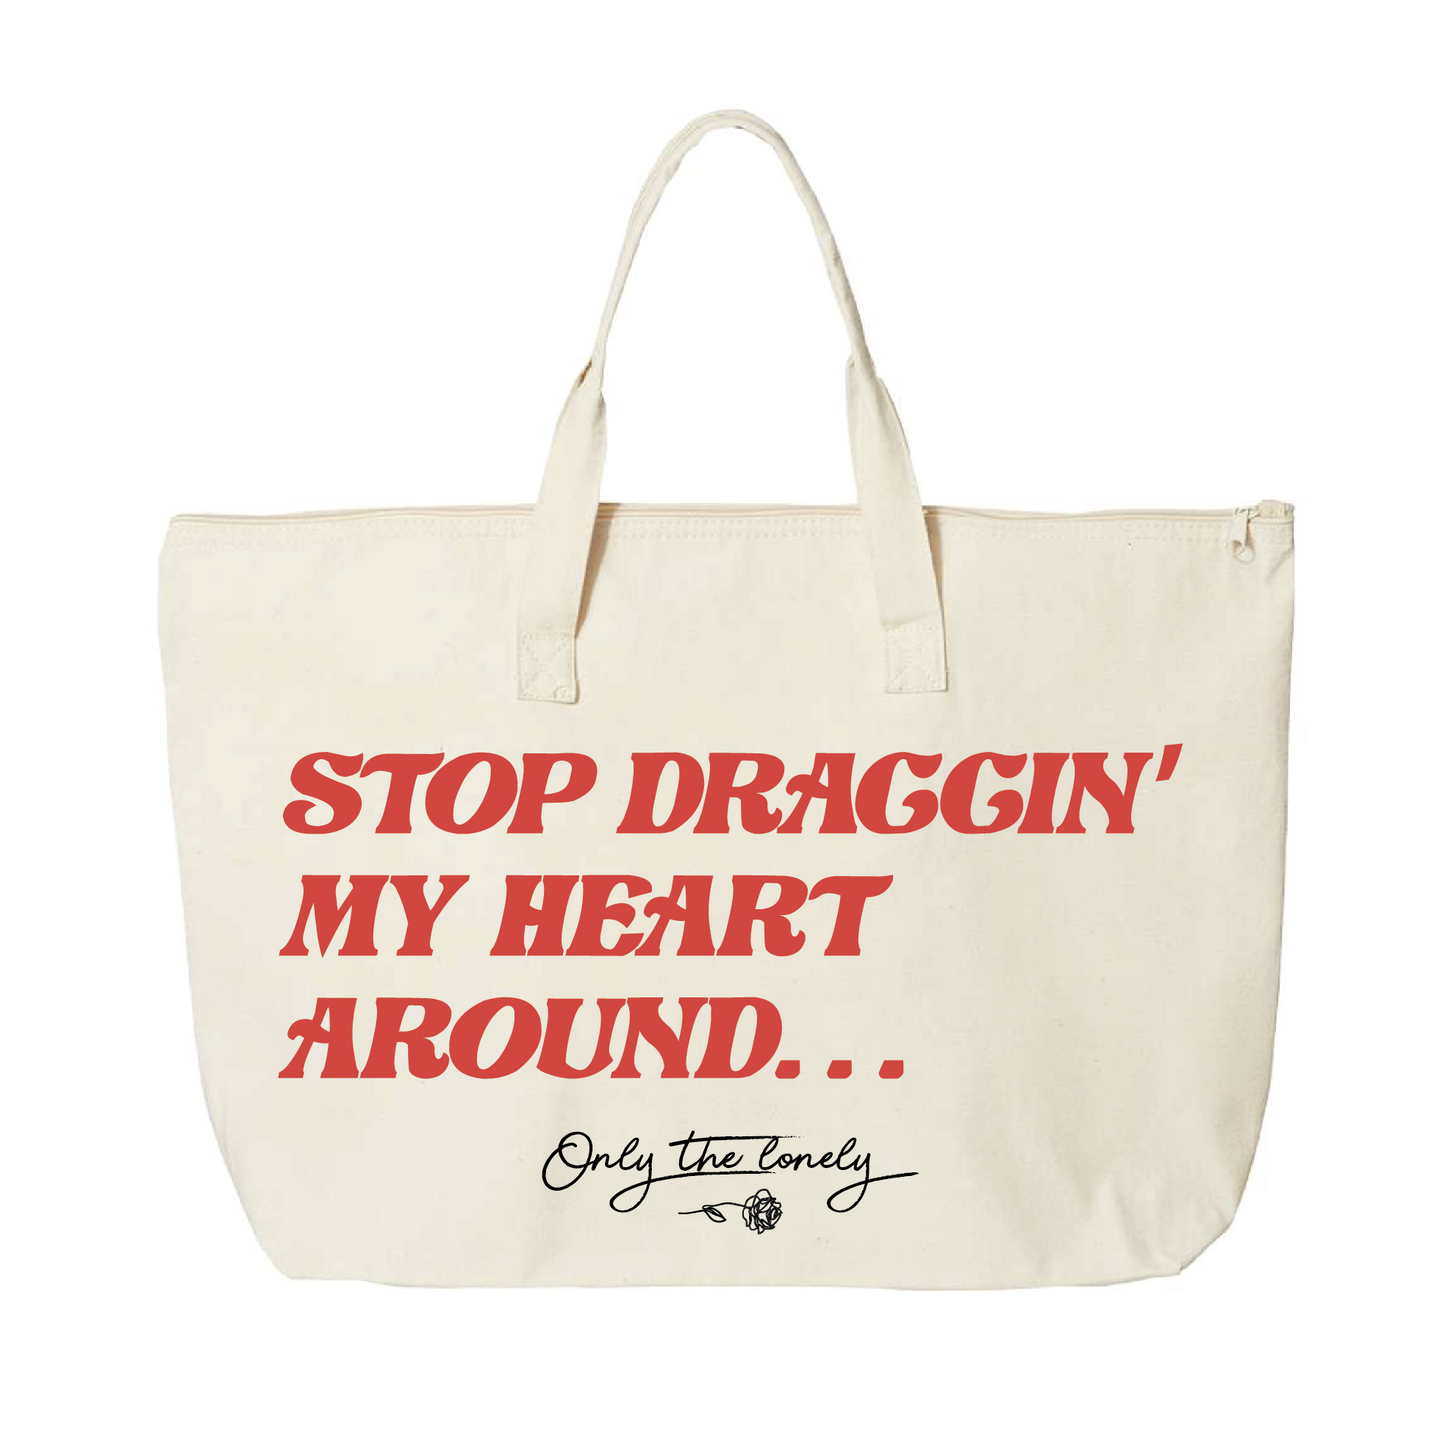 ONLY THE LONELY "STOP DRAGGIN' MY HEART AROUND" TOTE BAG